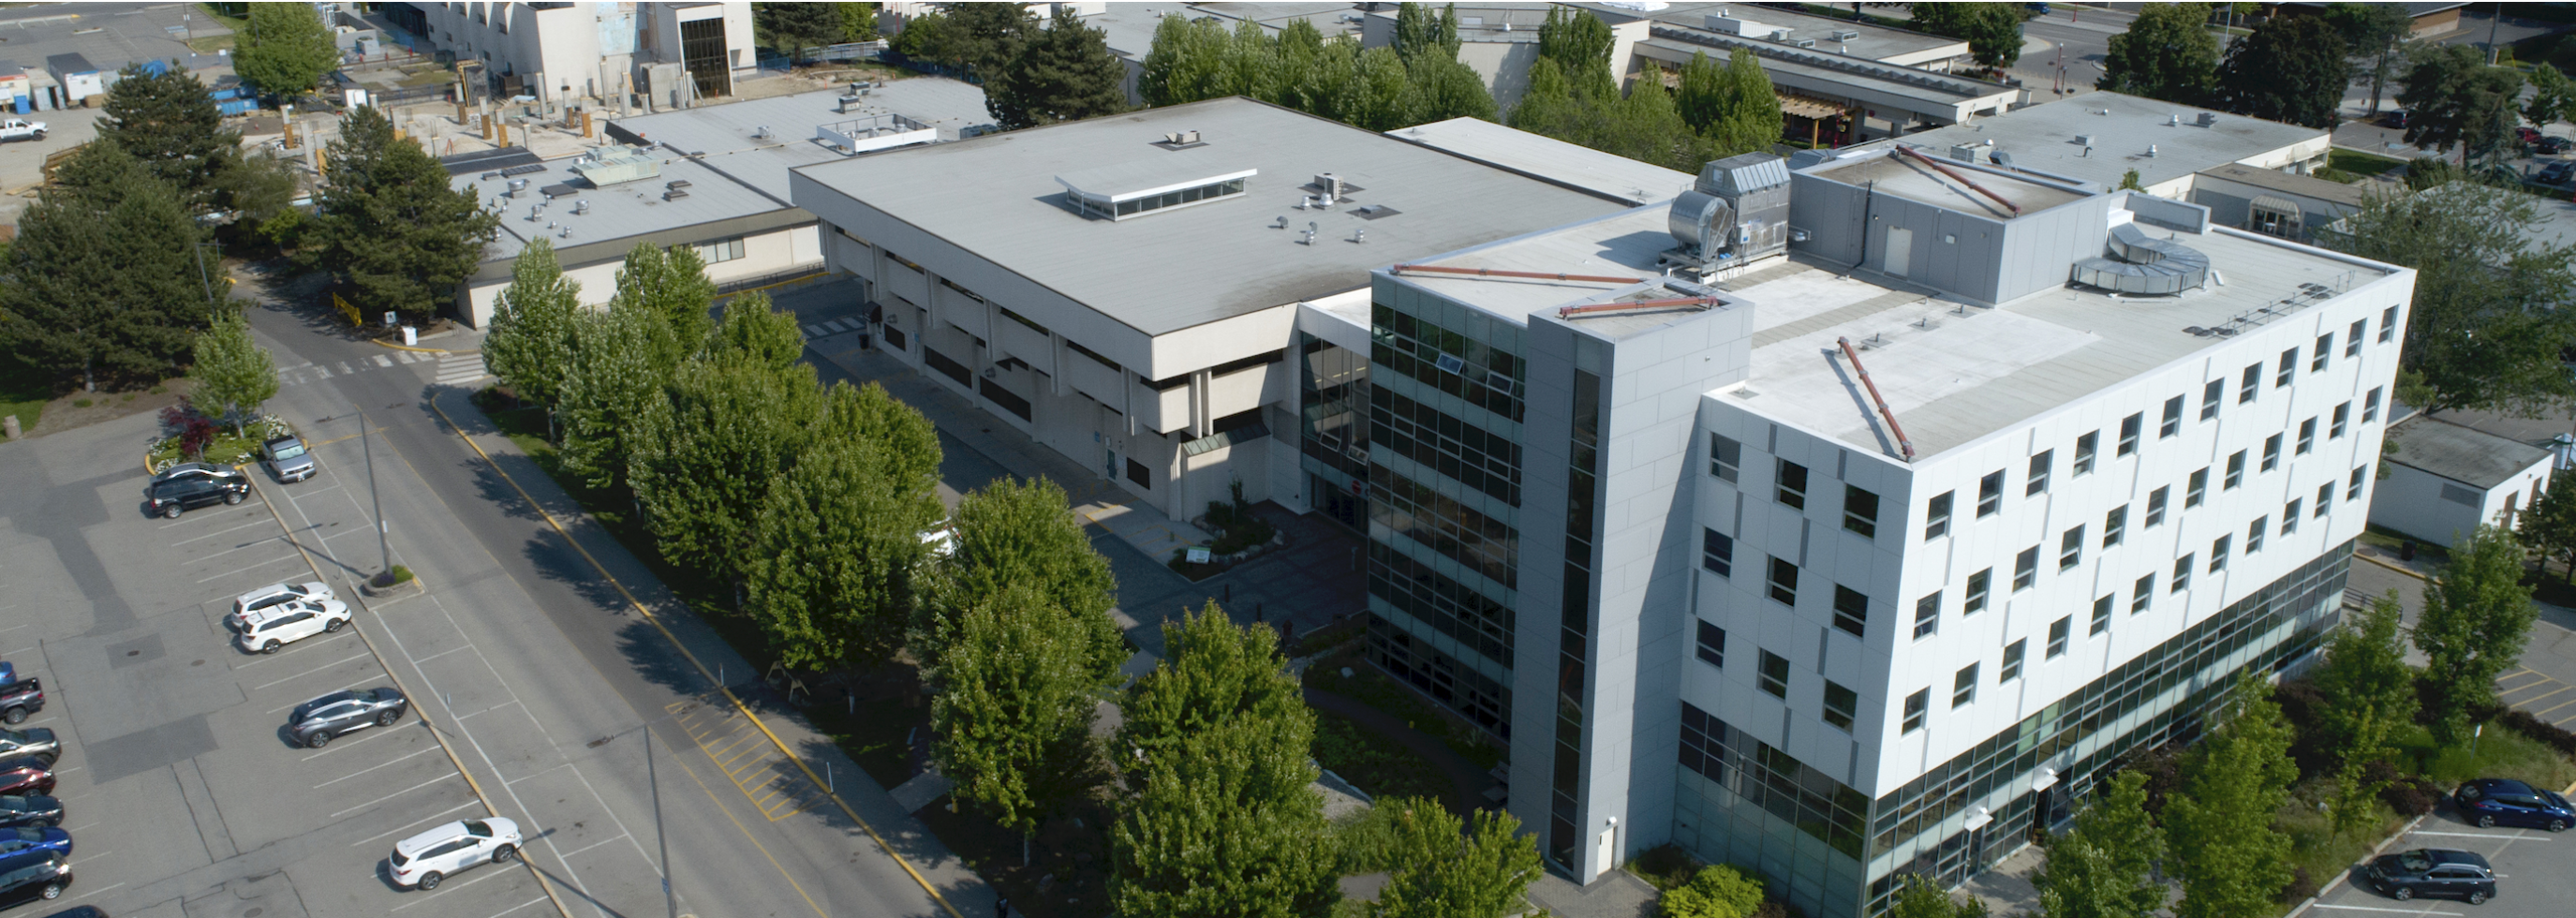 's Kelowna campus is located at 1000 KLO Rd.